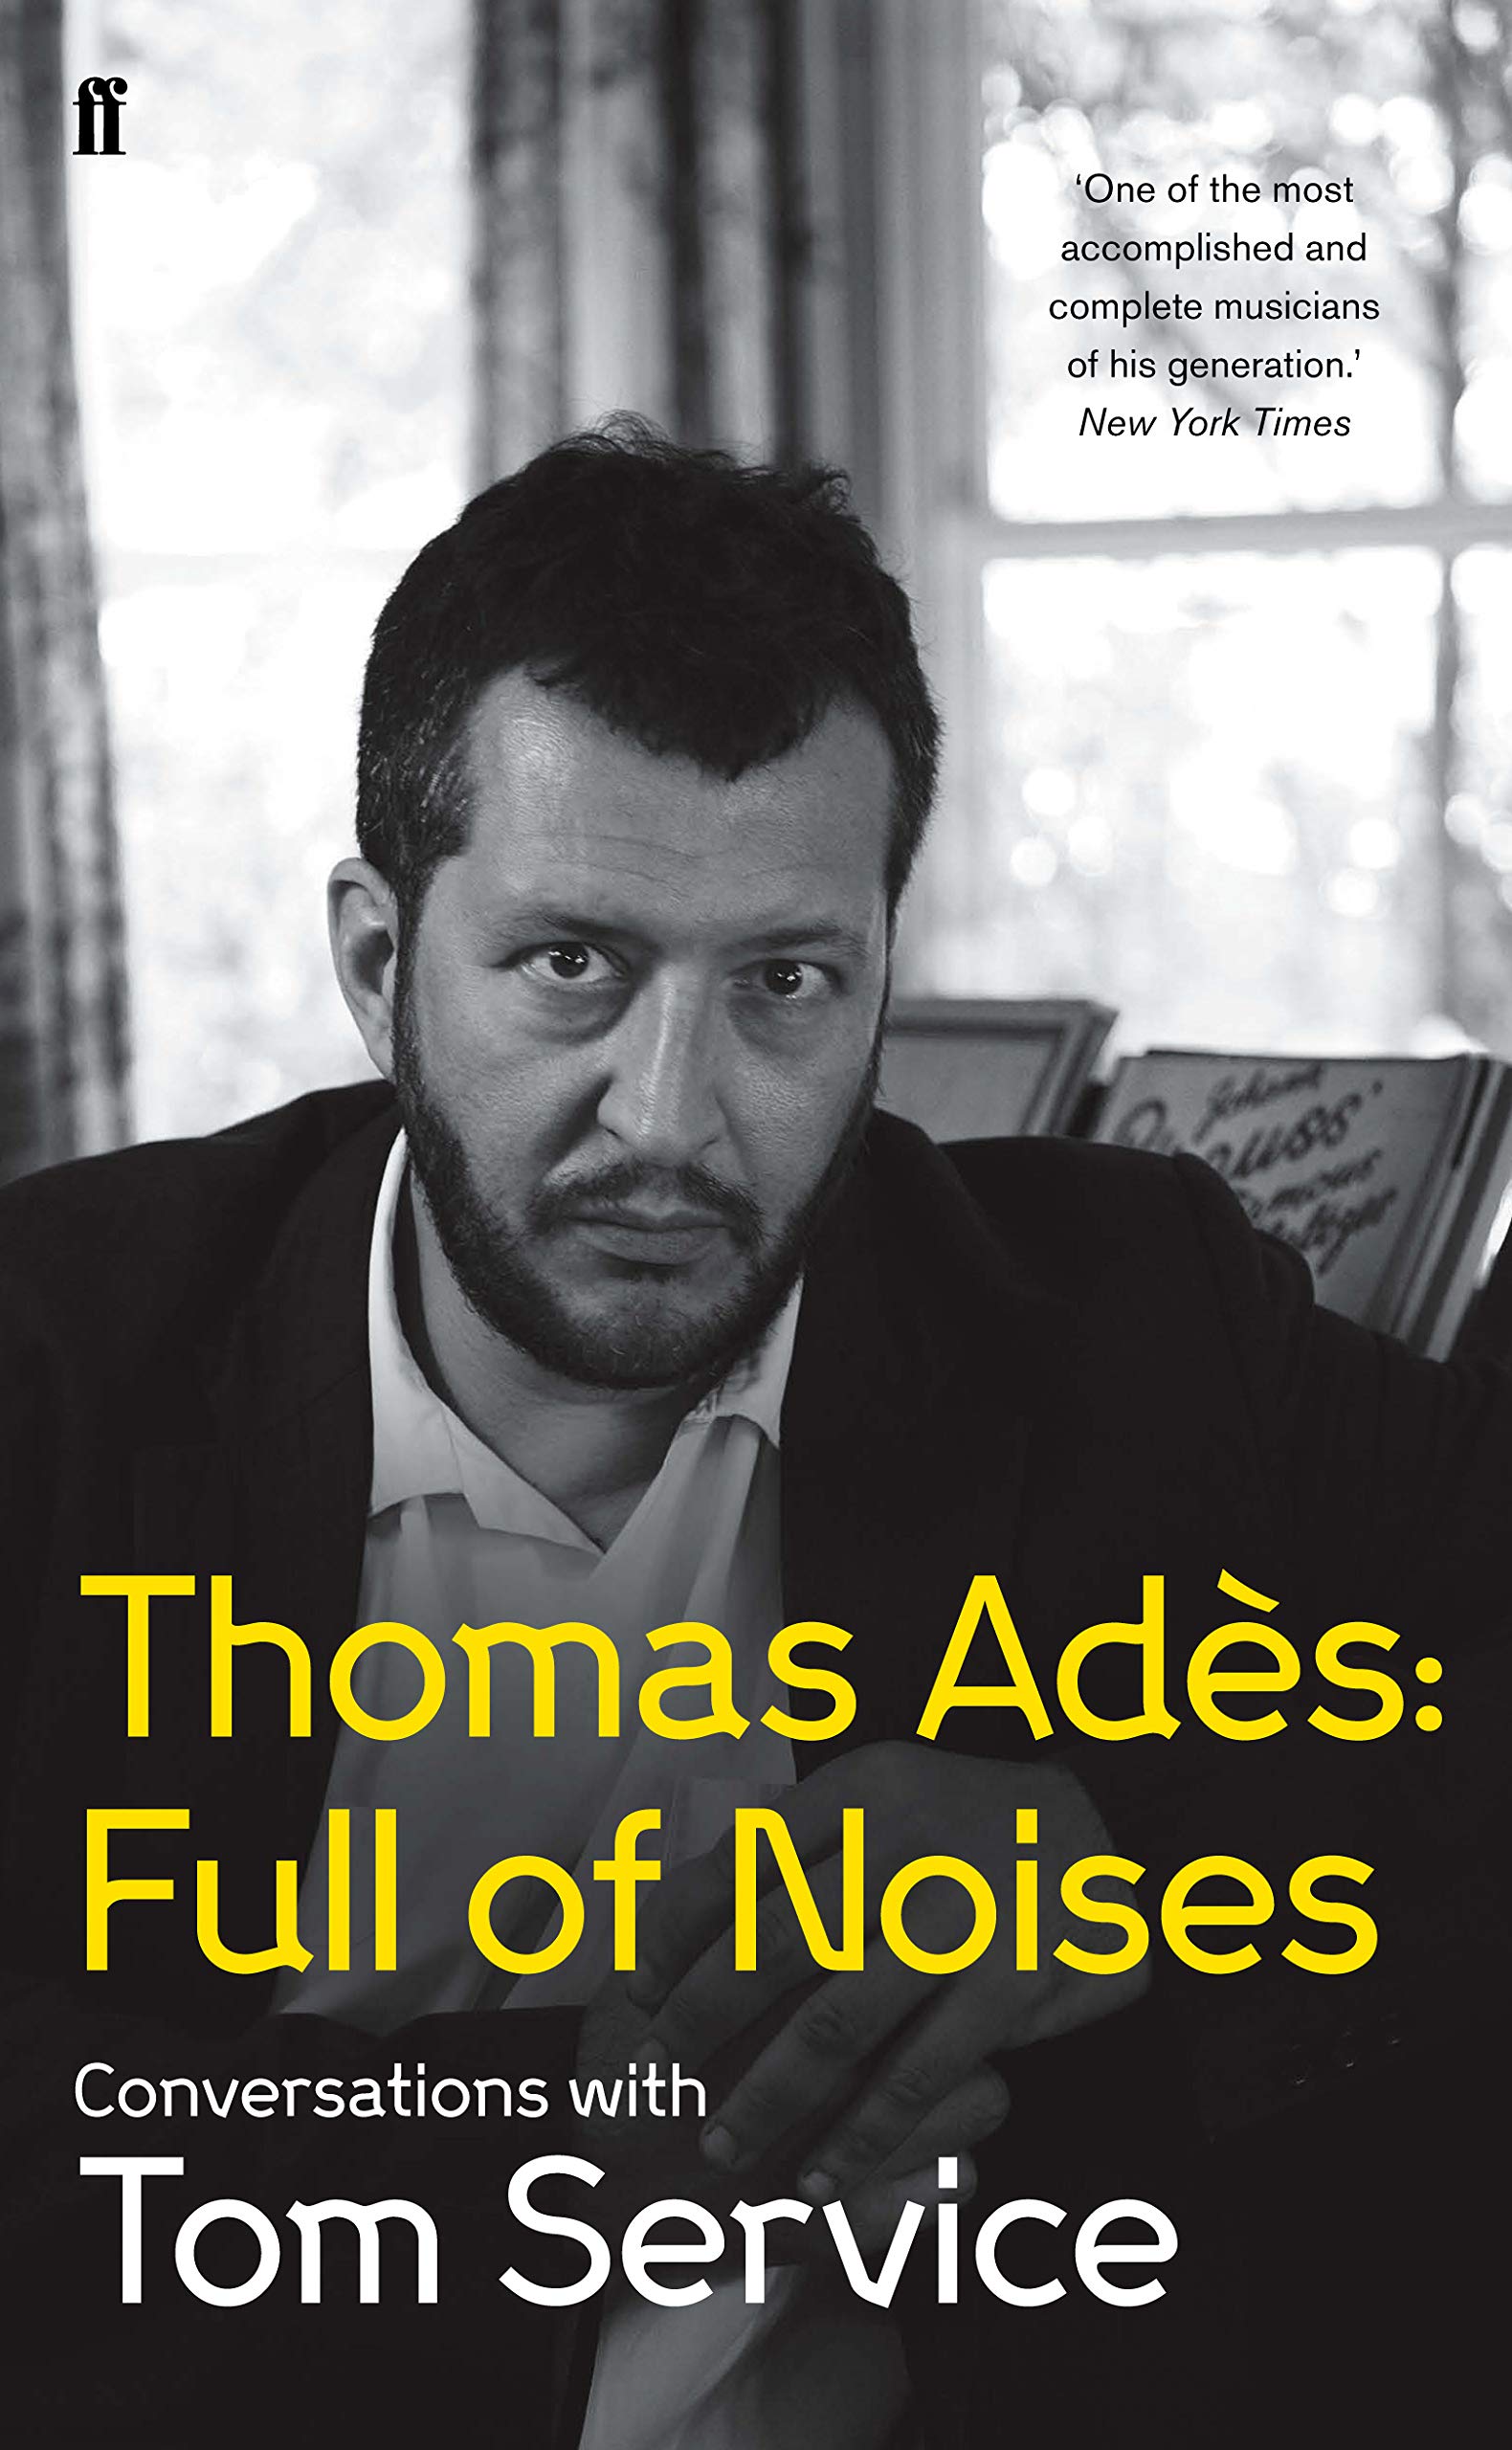 Thomas Adés: Full of Noises - Conversations with Tom Service